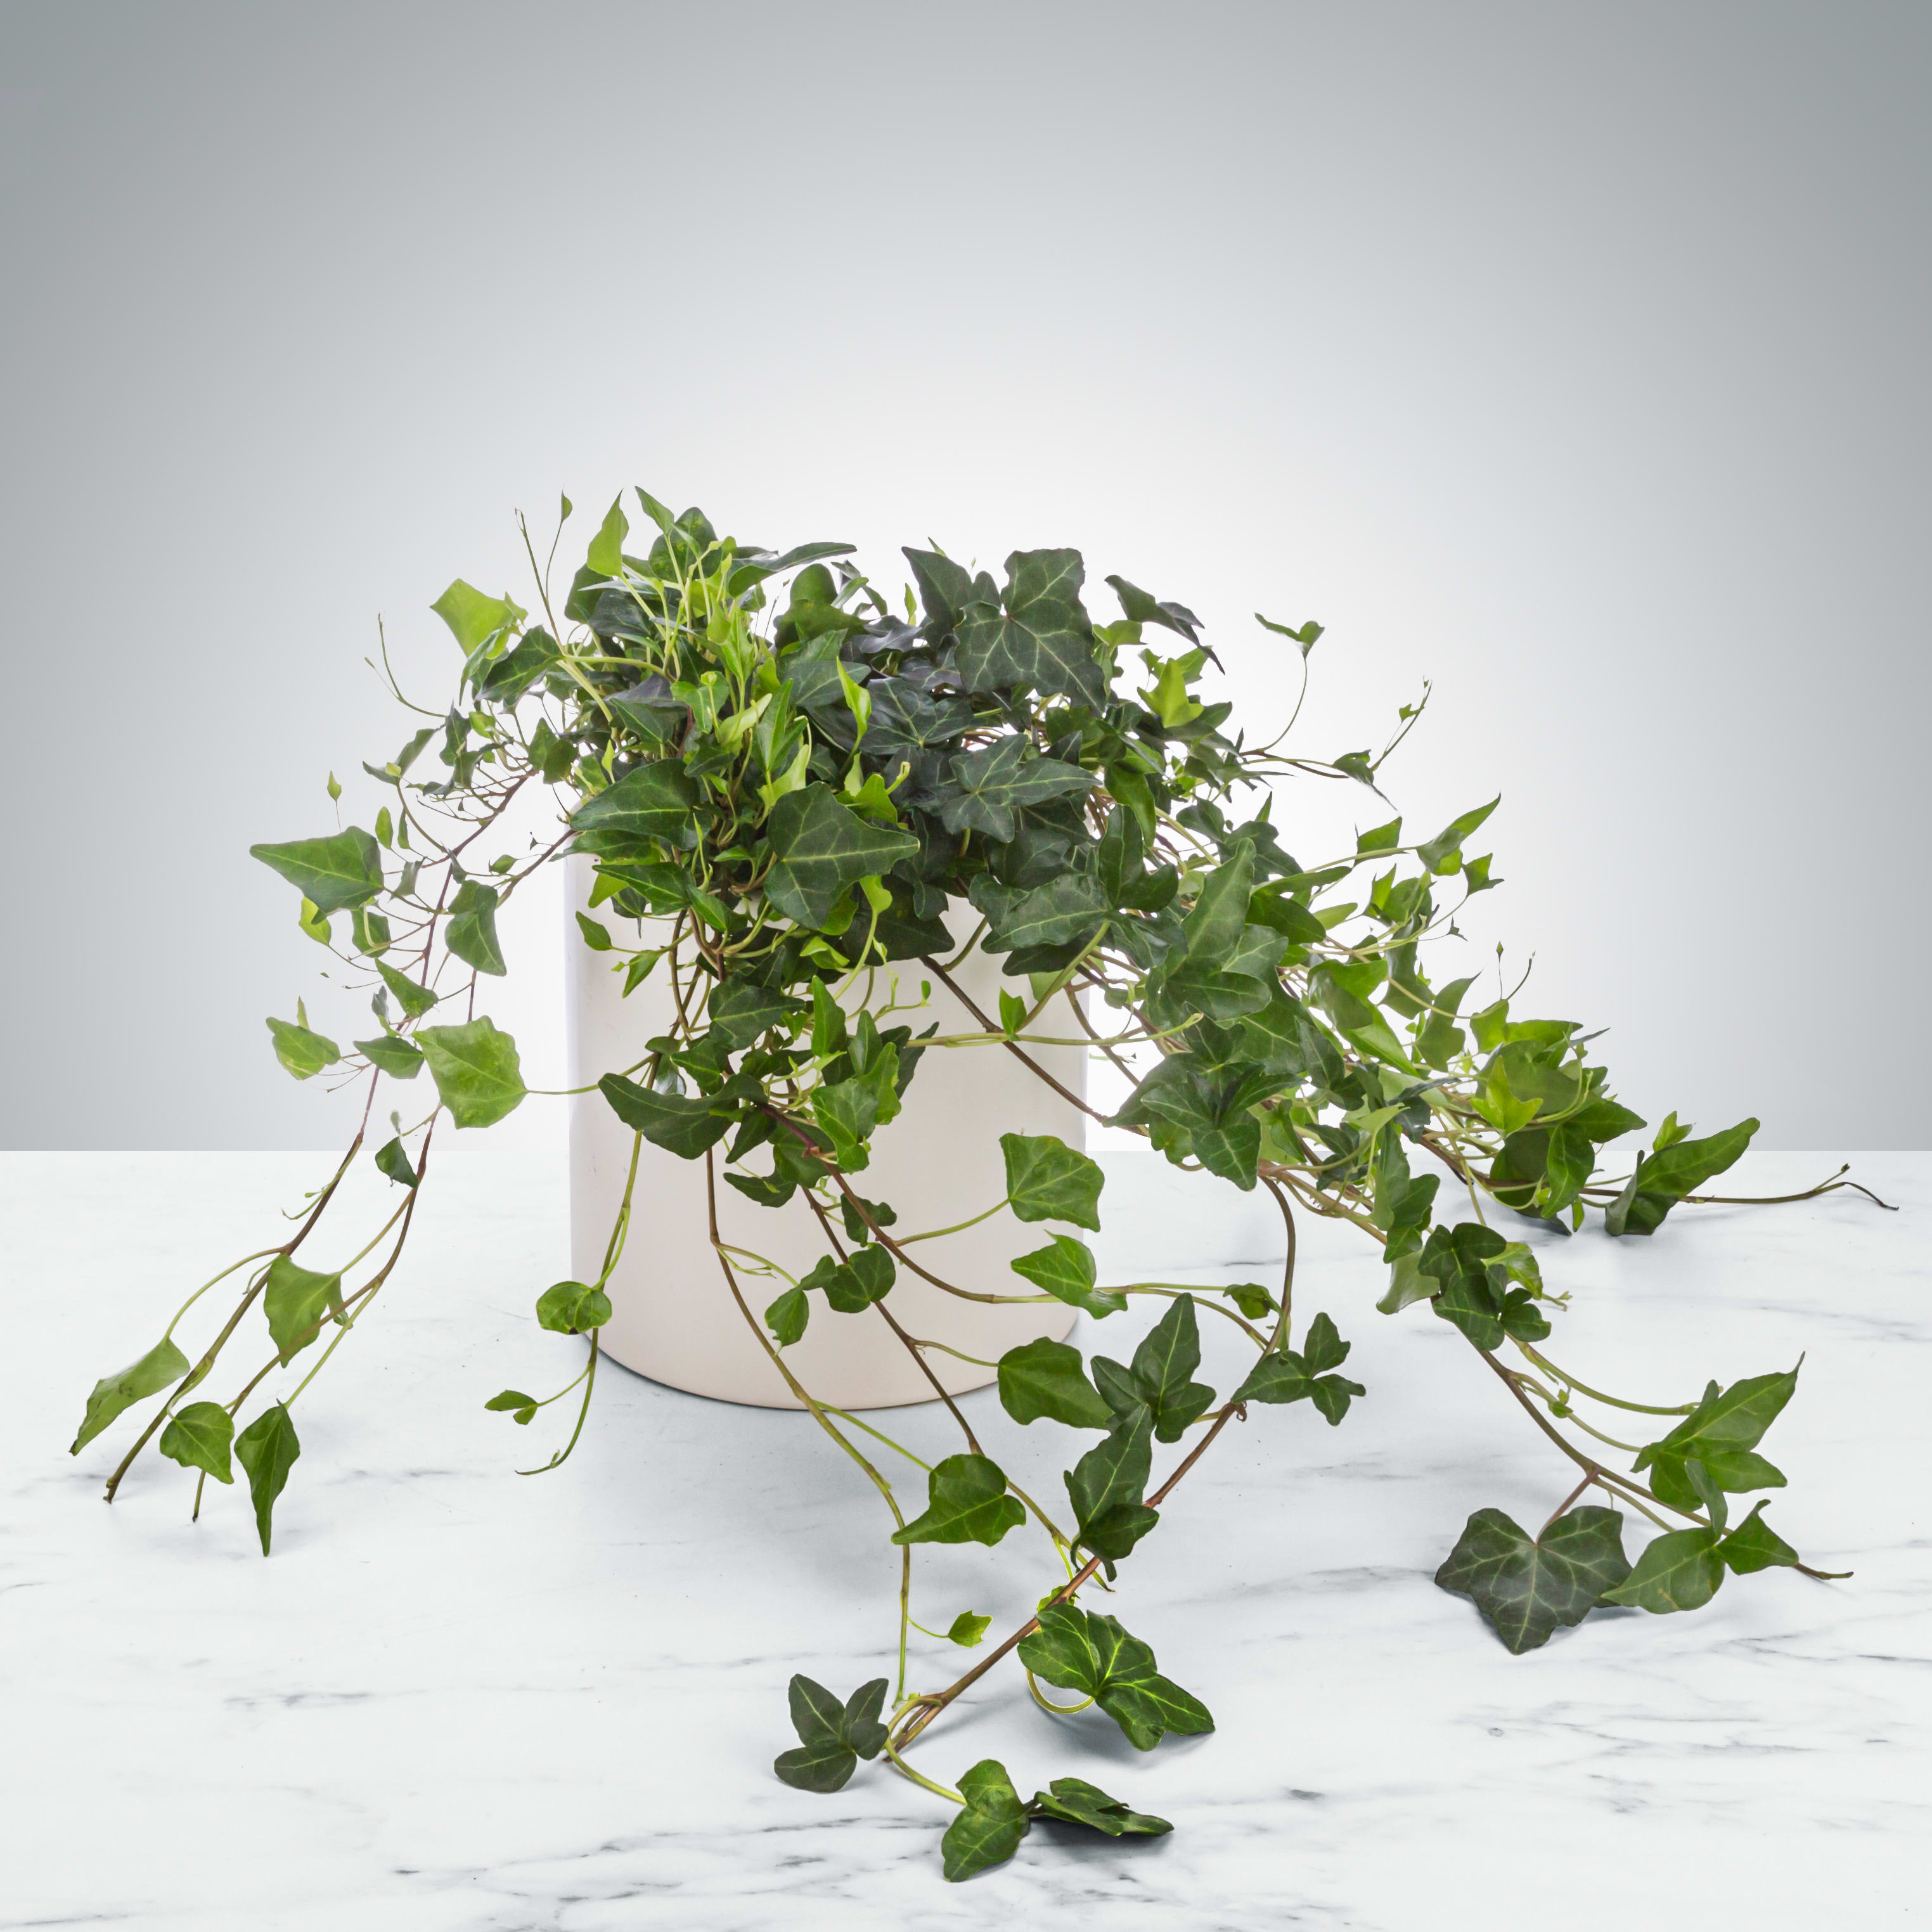 Ivy Plant - The english ivy plant is a classic houseplant. It likes medium to bright light and is an excellent plant for air filtration. Send it as a birthday or as a just because surprise for a long-lasting gift and impression.